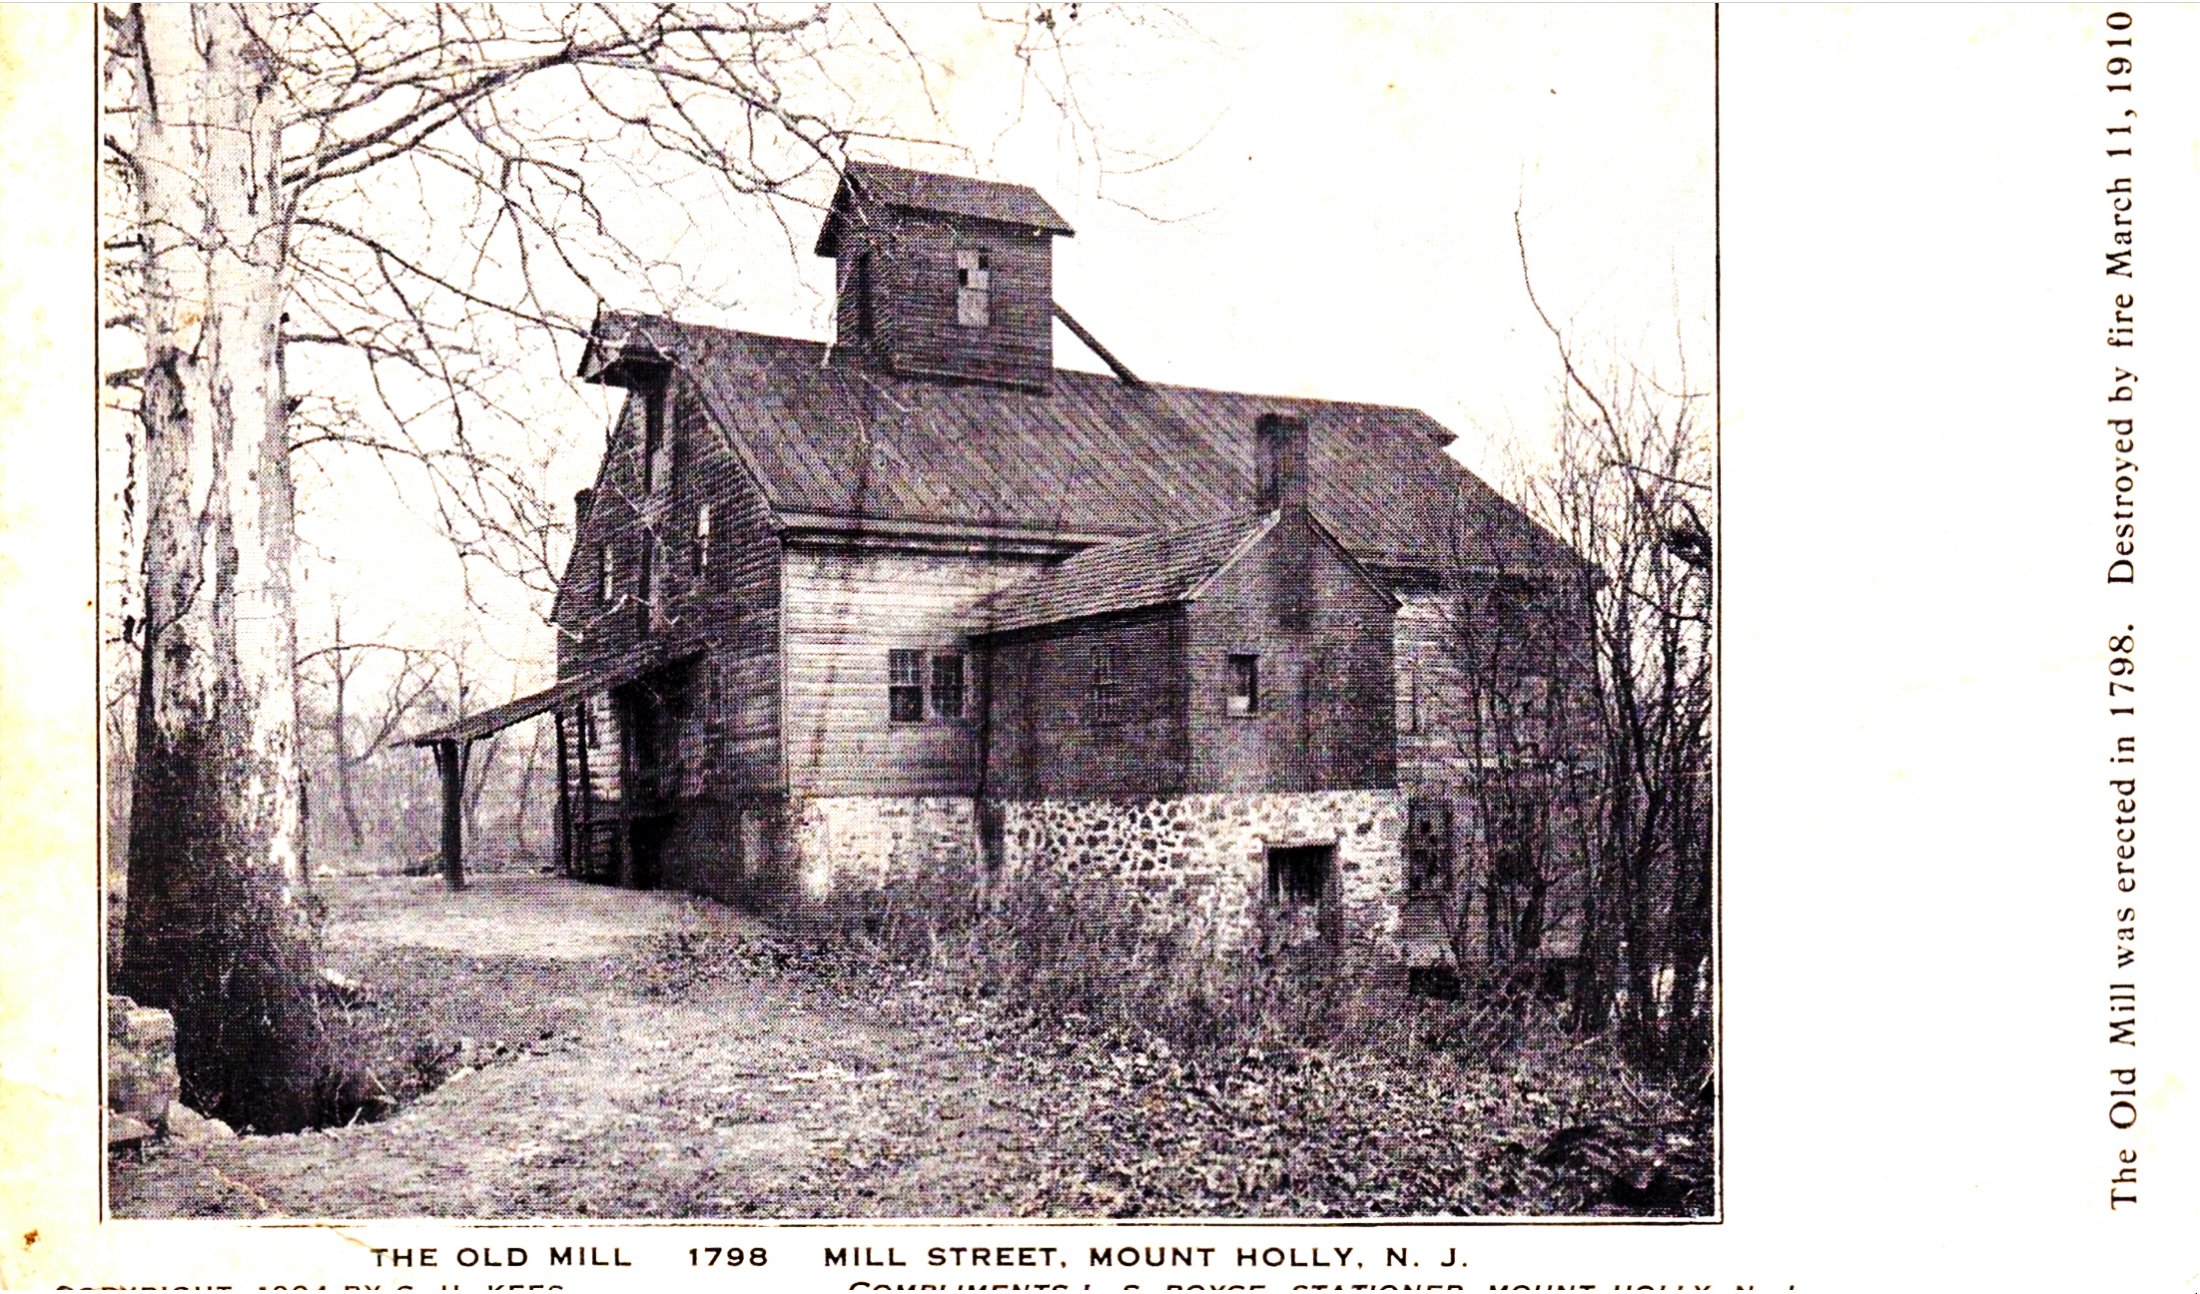 Mount Holly - The Old Mill - Built 1798 - Mill Street - c 1910